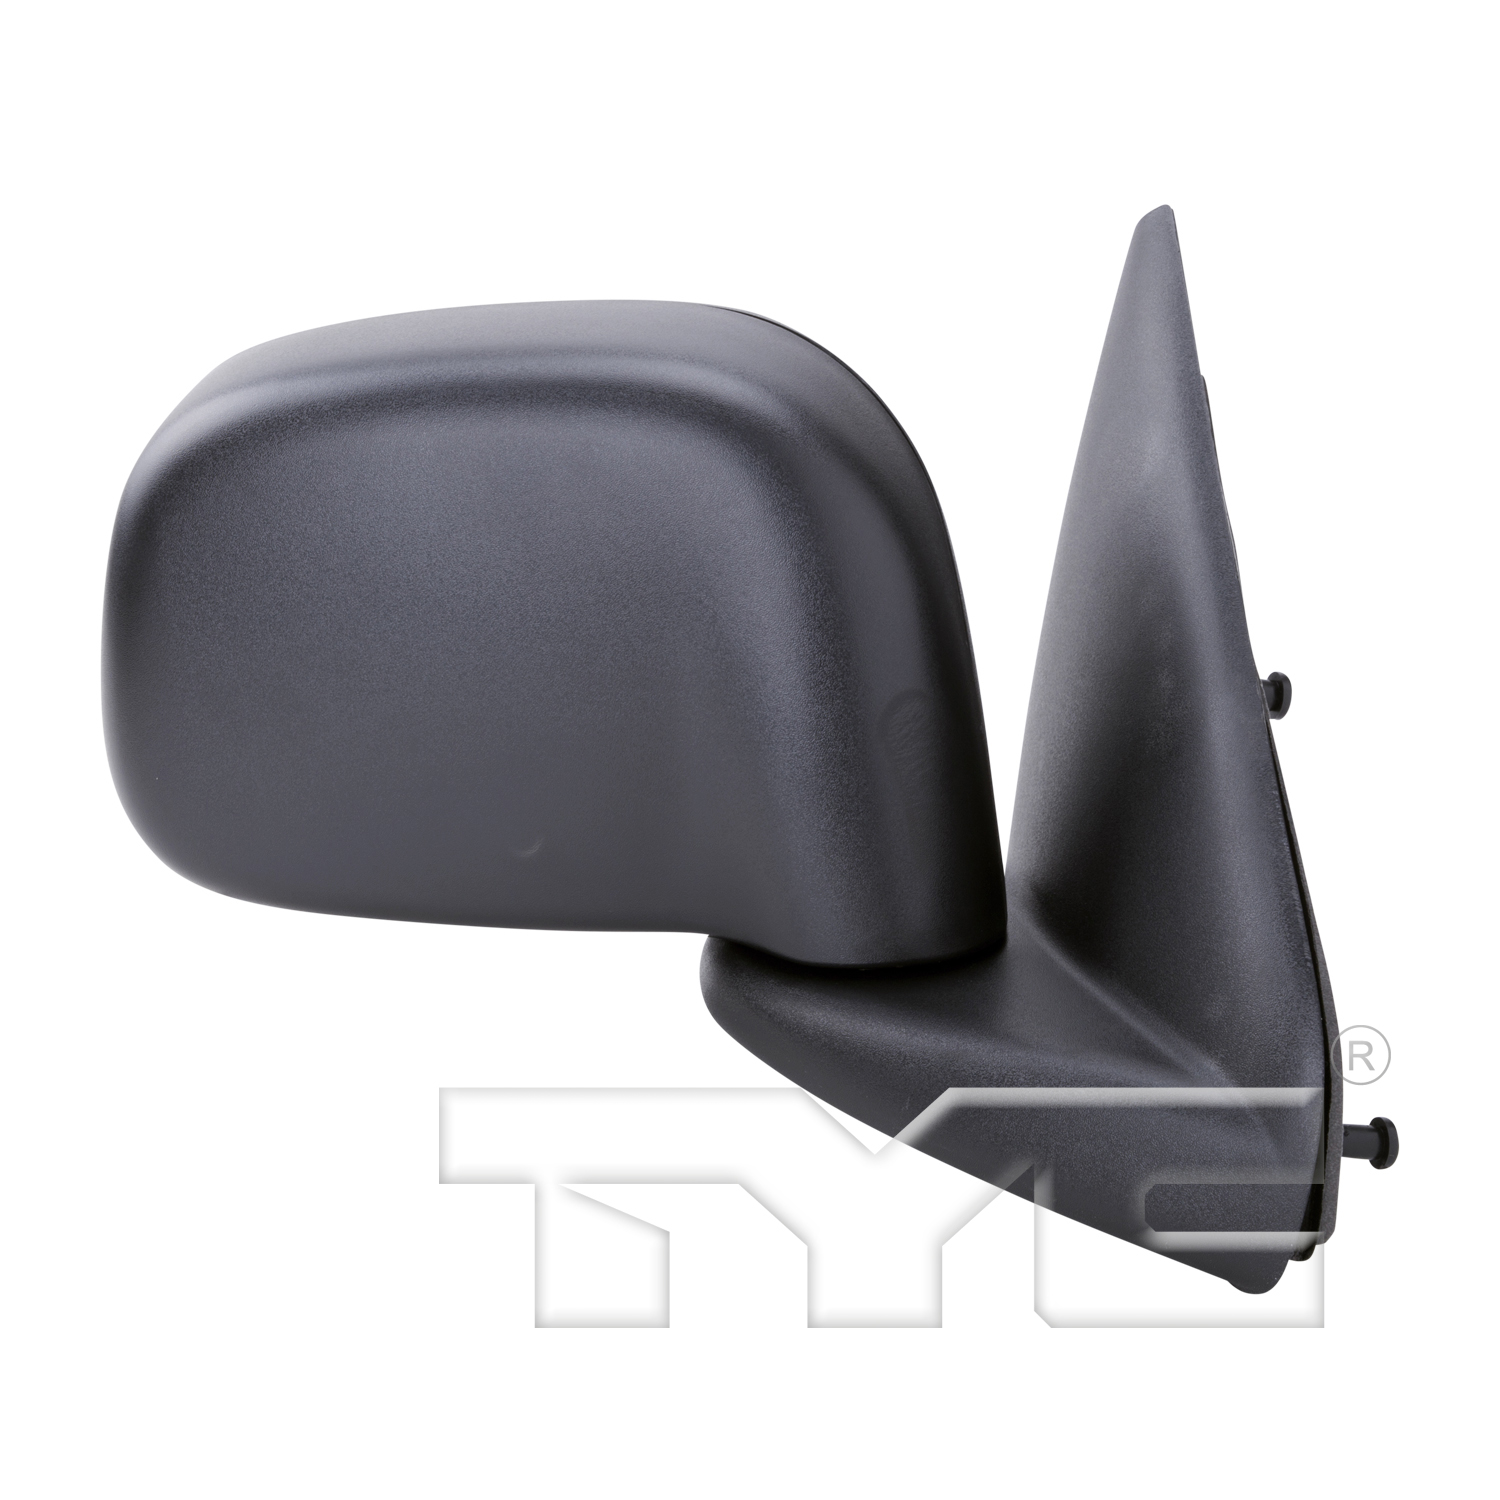 Aftermarket MIRRORS for DODGE - RAM 3500, RAM 3500,05-09,RT Mirror outside rear view